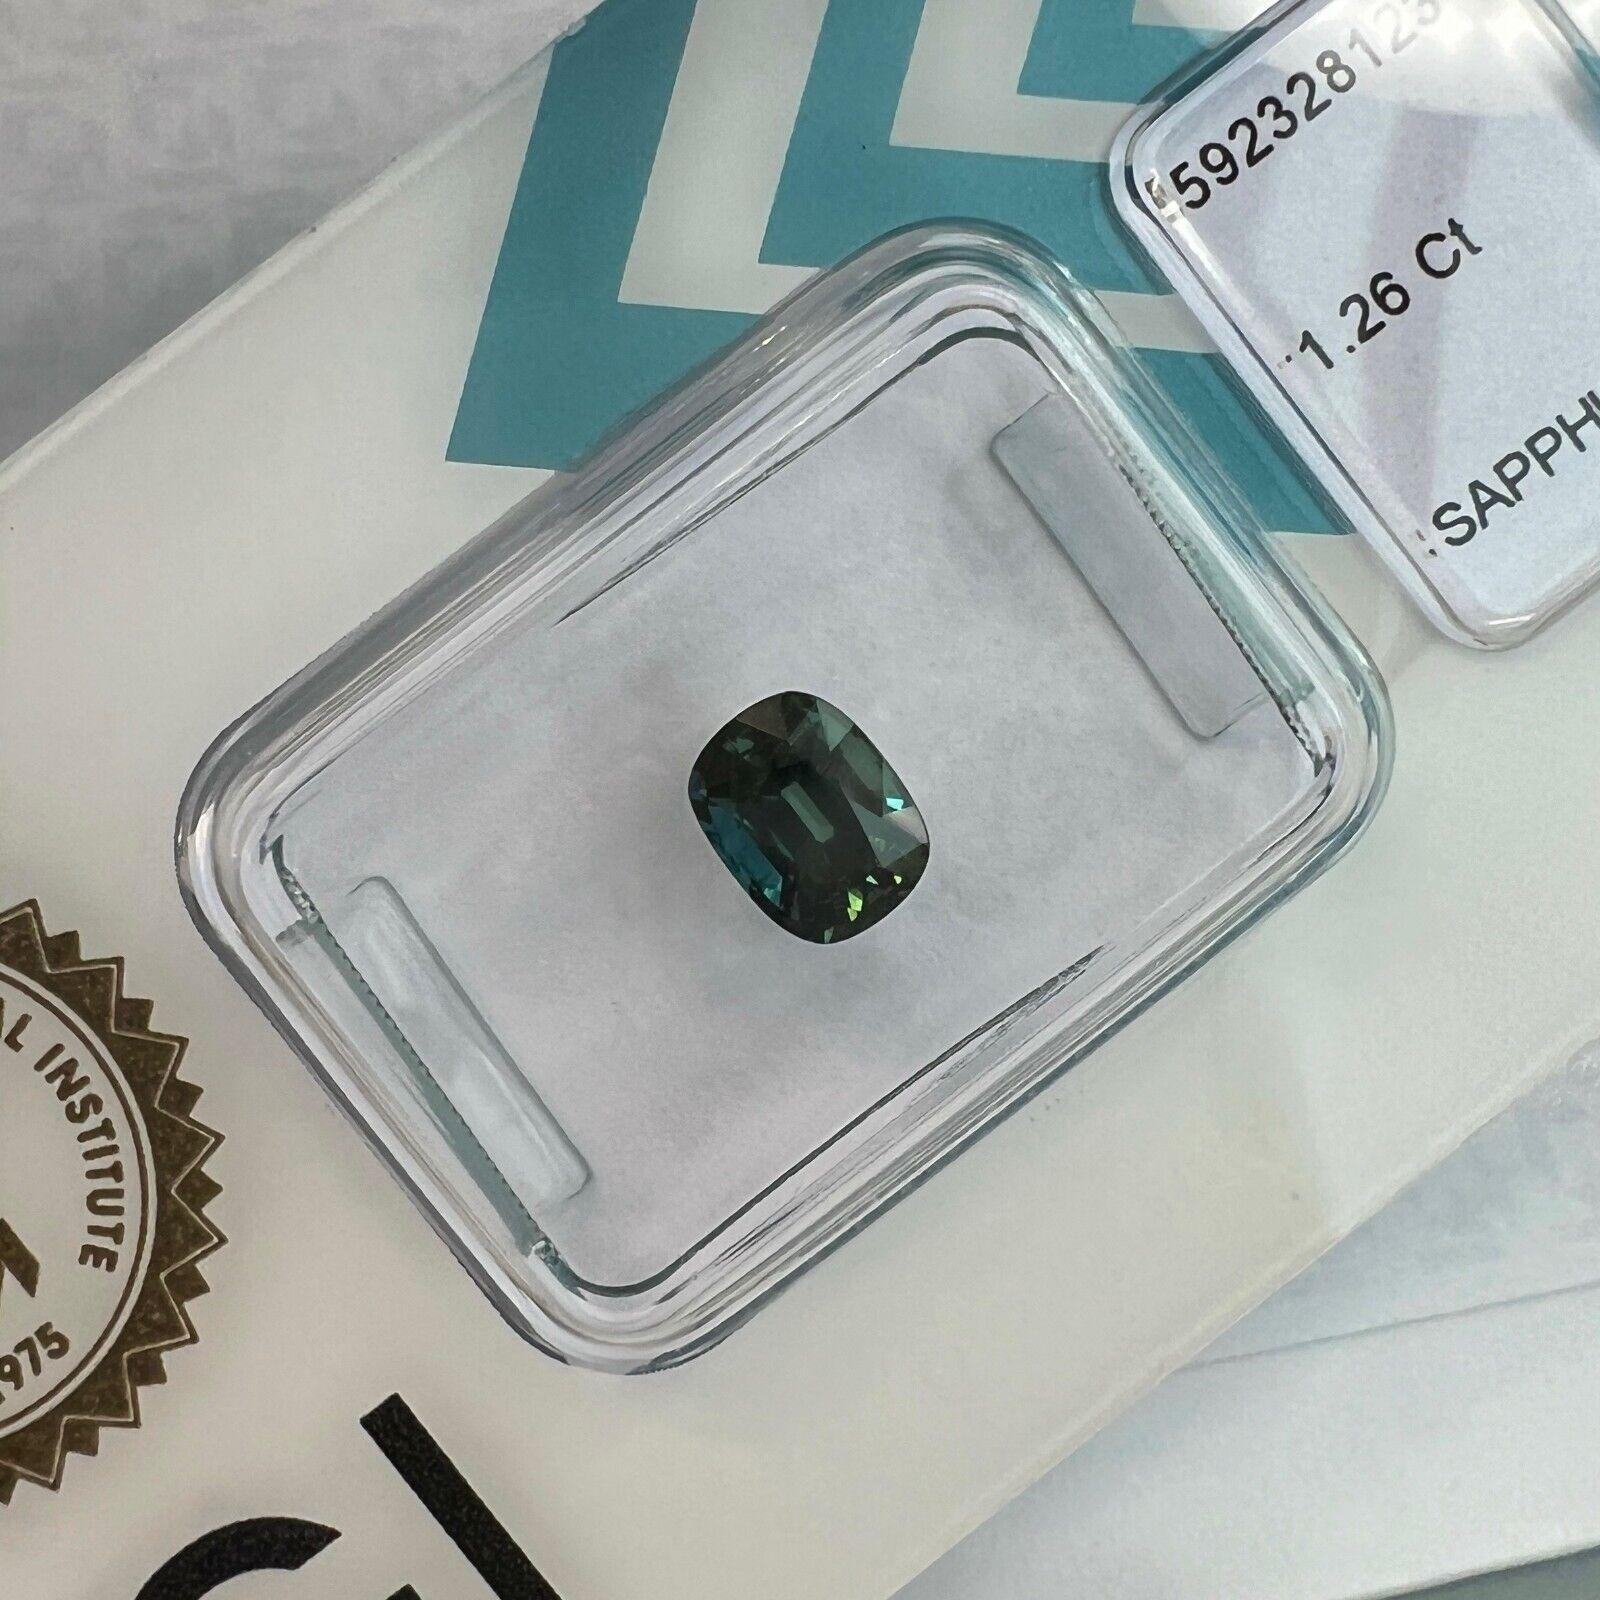 IGI Certified 1.26Ct Natural Deep Green Blue Teal Sapphire Unheated Cushion Cut

Fine Natural Deep Green Blue ‘Teal’ Untreated Sapphire In IGI Blister.
1.26 Carat with an excellent cushion cut and excellent clarity. VS.
Fully certified and sealed by